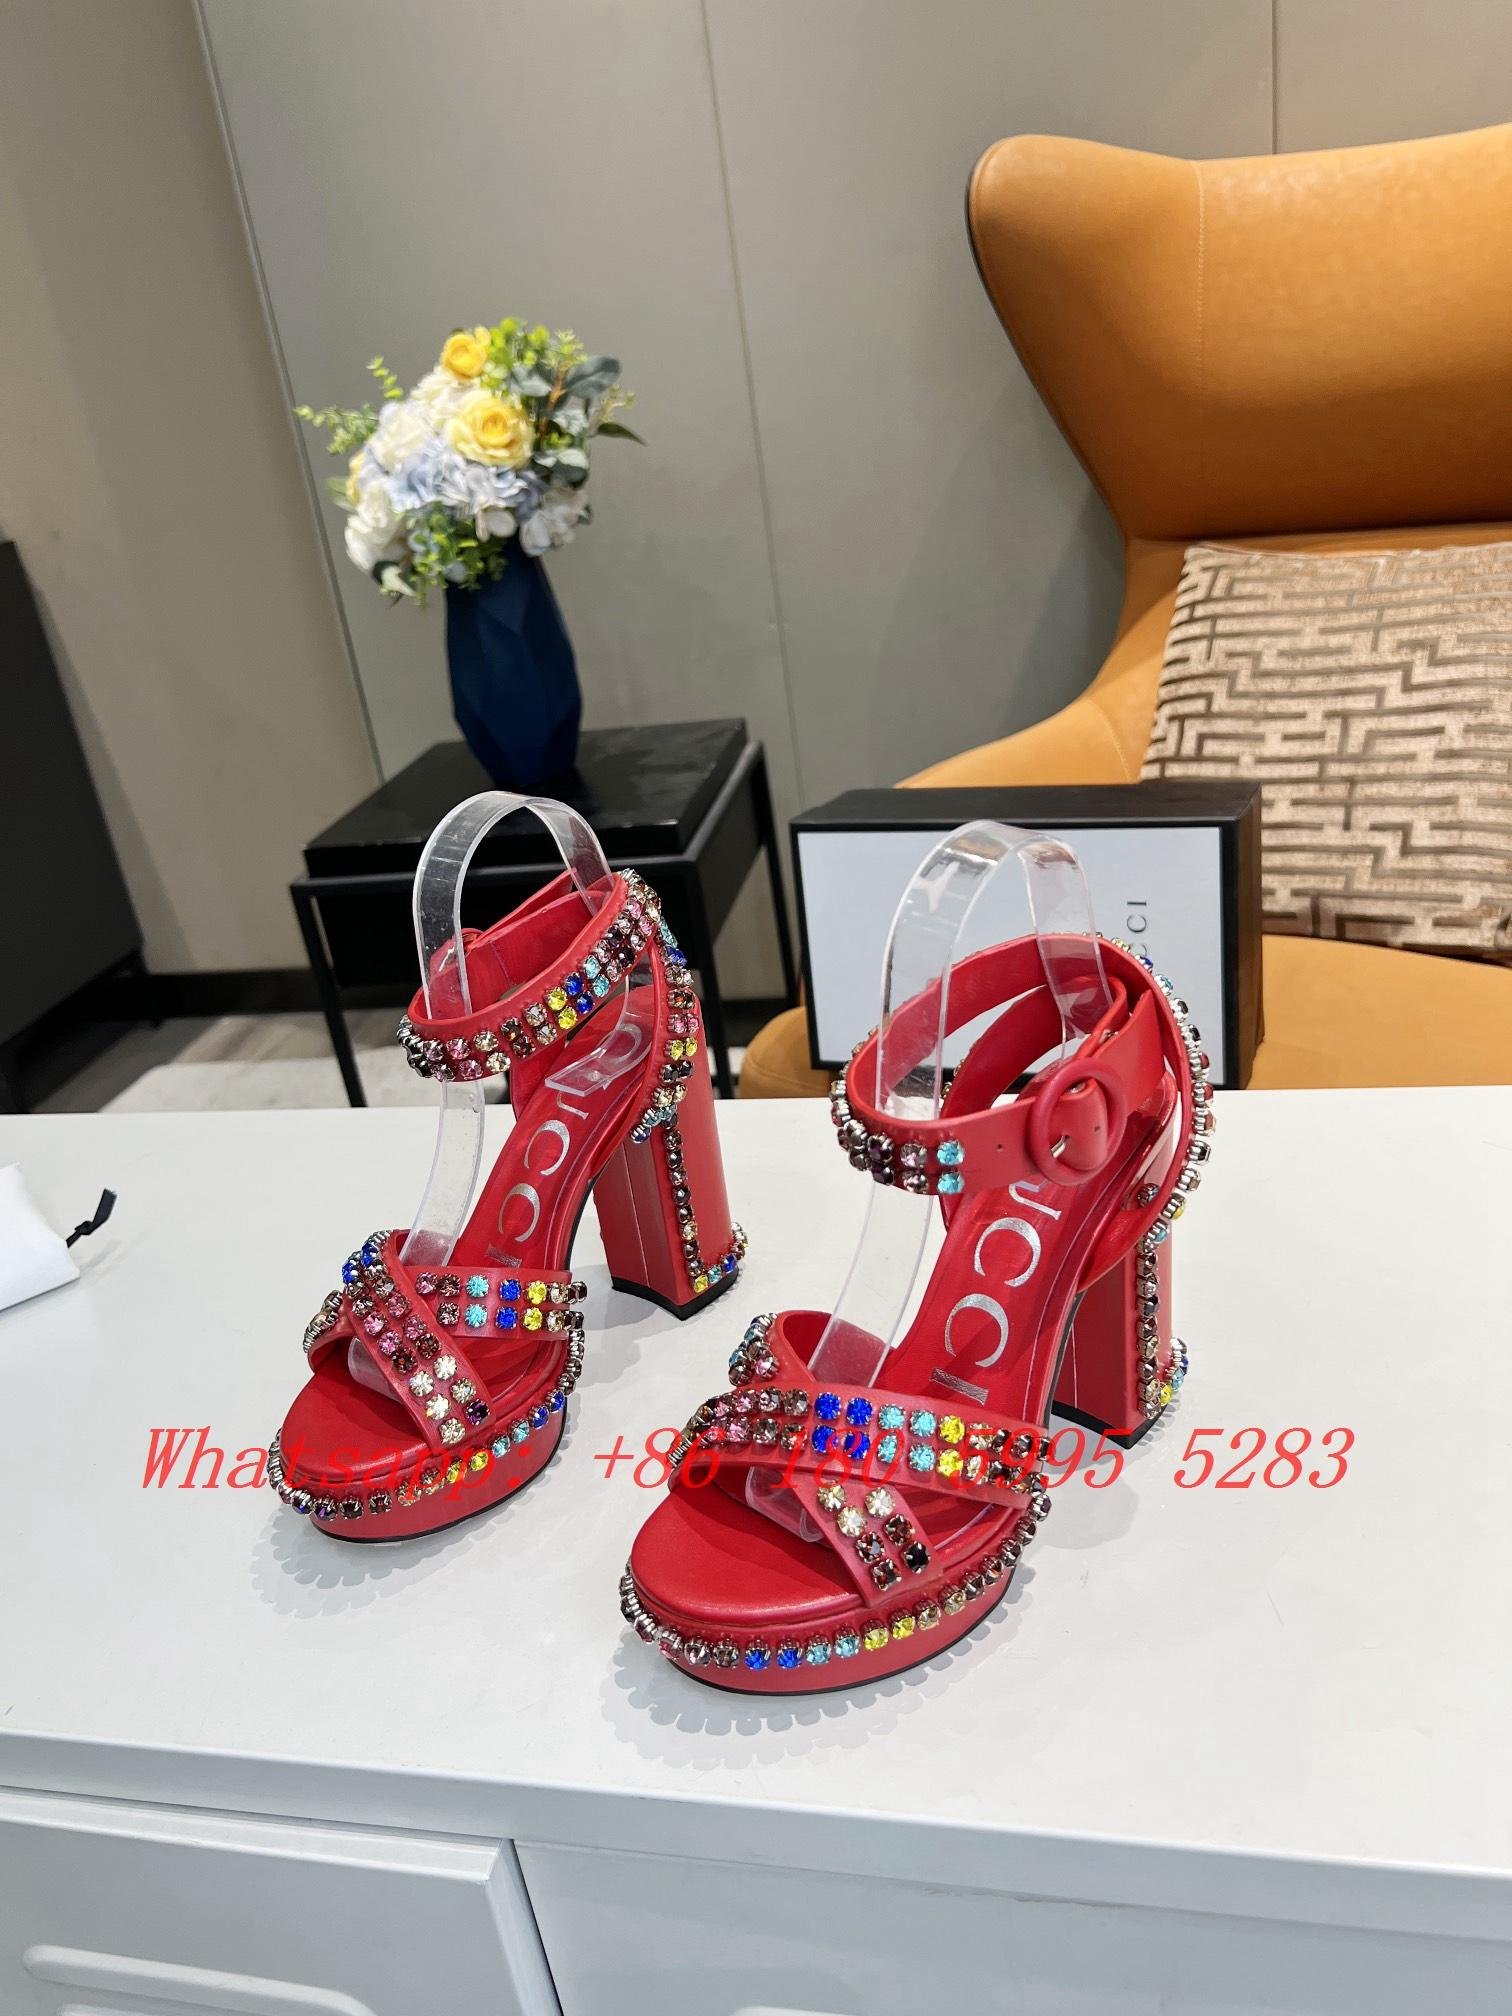 2022 Top Quality Gucci High Heels Newest Women Gucci Wedding party shoes